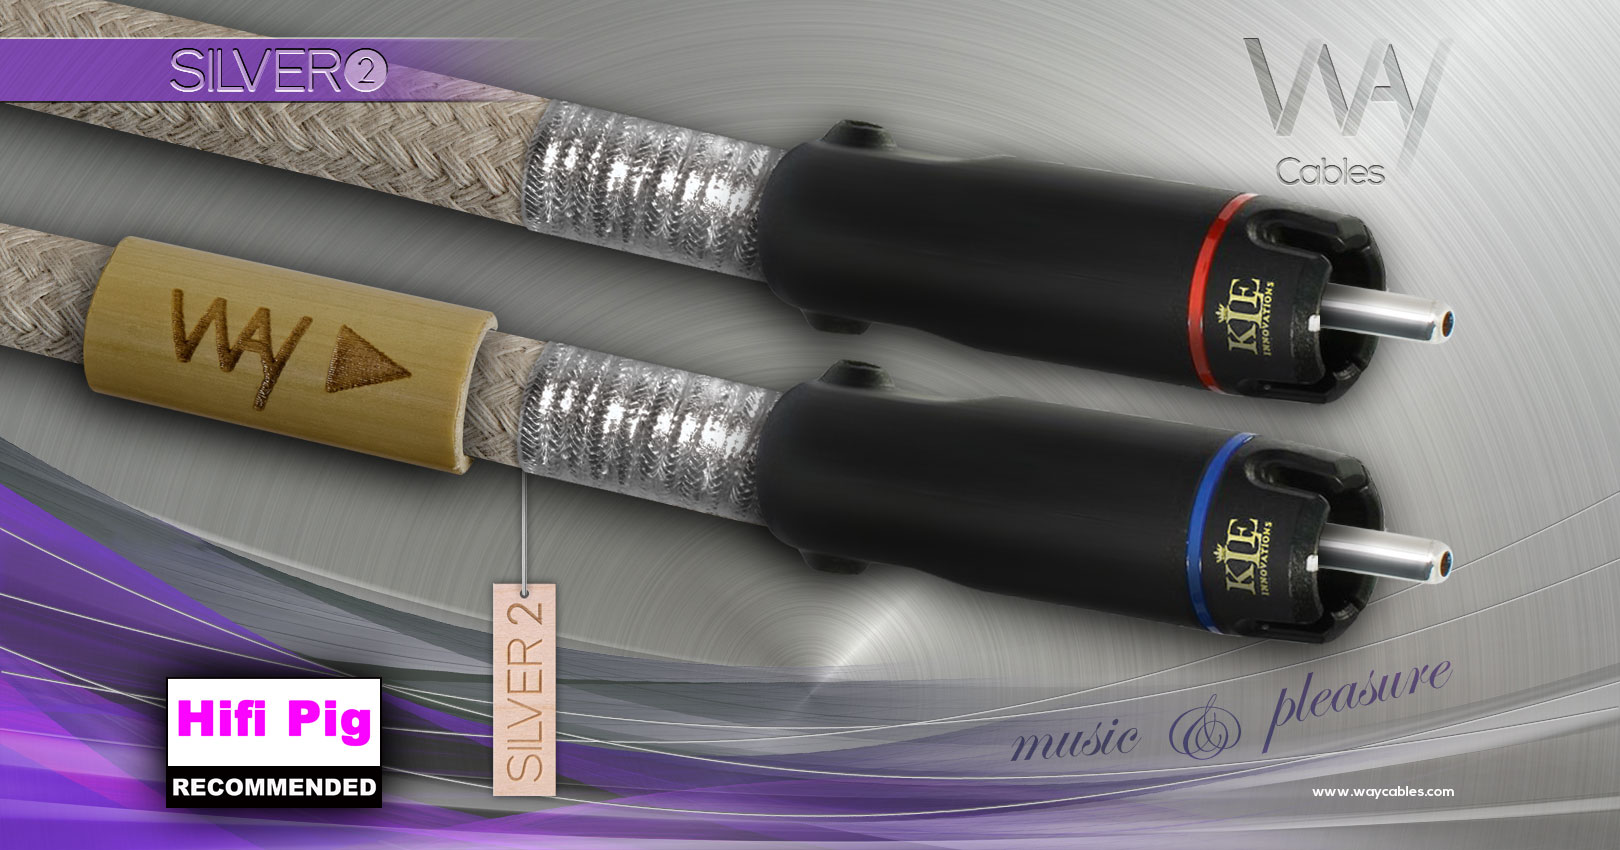 AWARDED Way Cables SILVER 2 interconnect with KLEI Copper Harmony RCA plugs - RECOMMENDED PRODUCT BY HiFi Pig Magazine